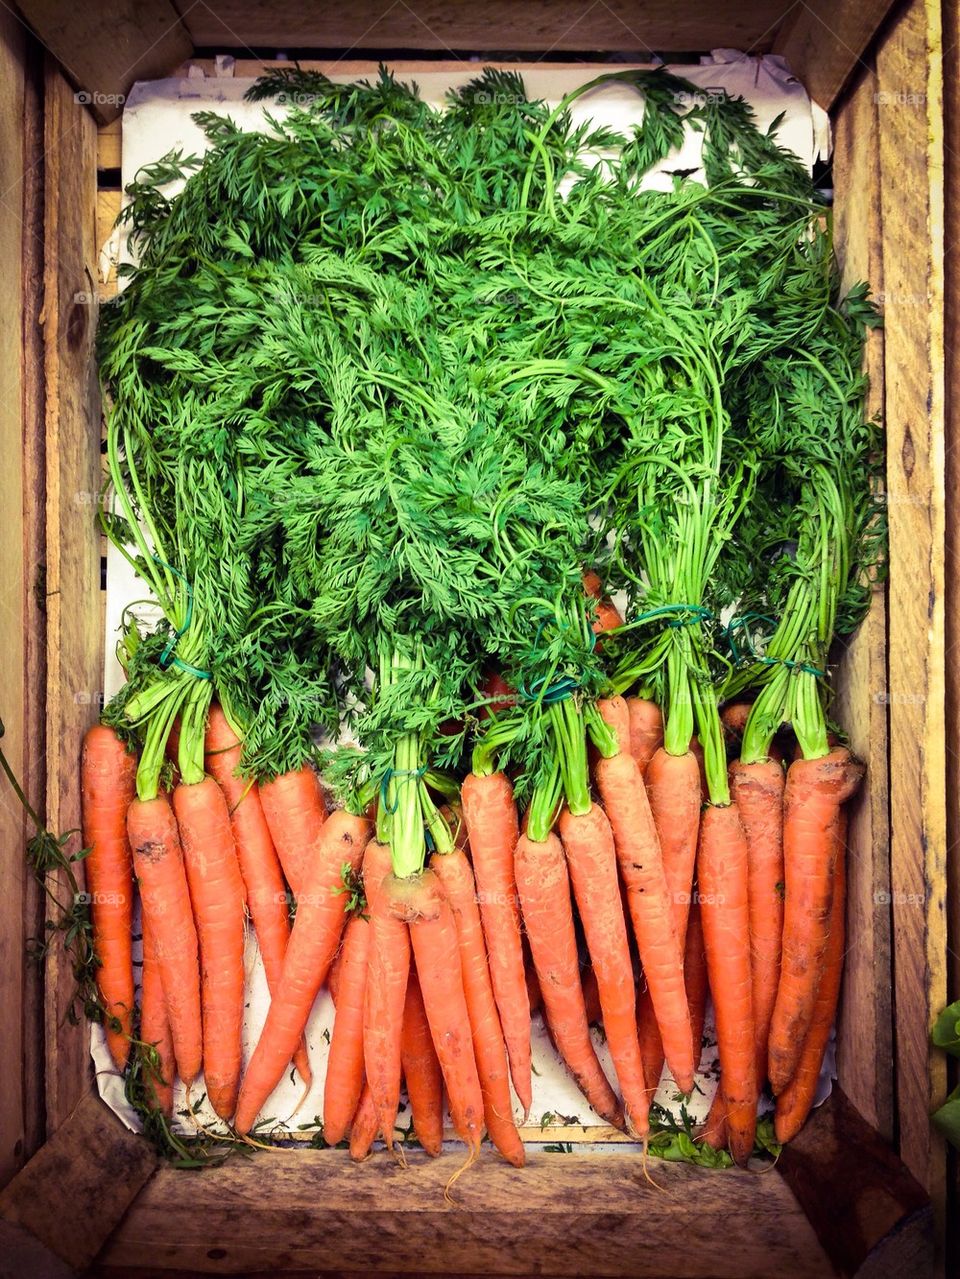 Carrots in container